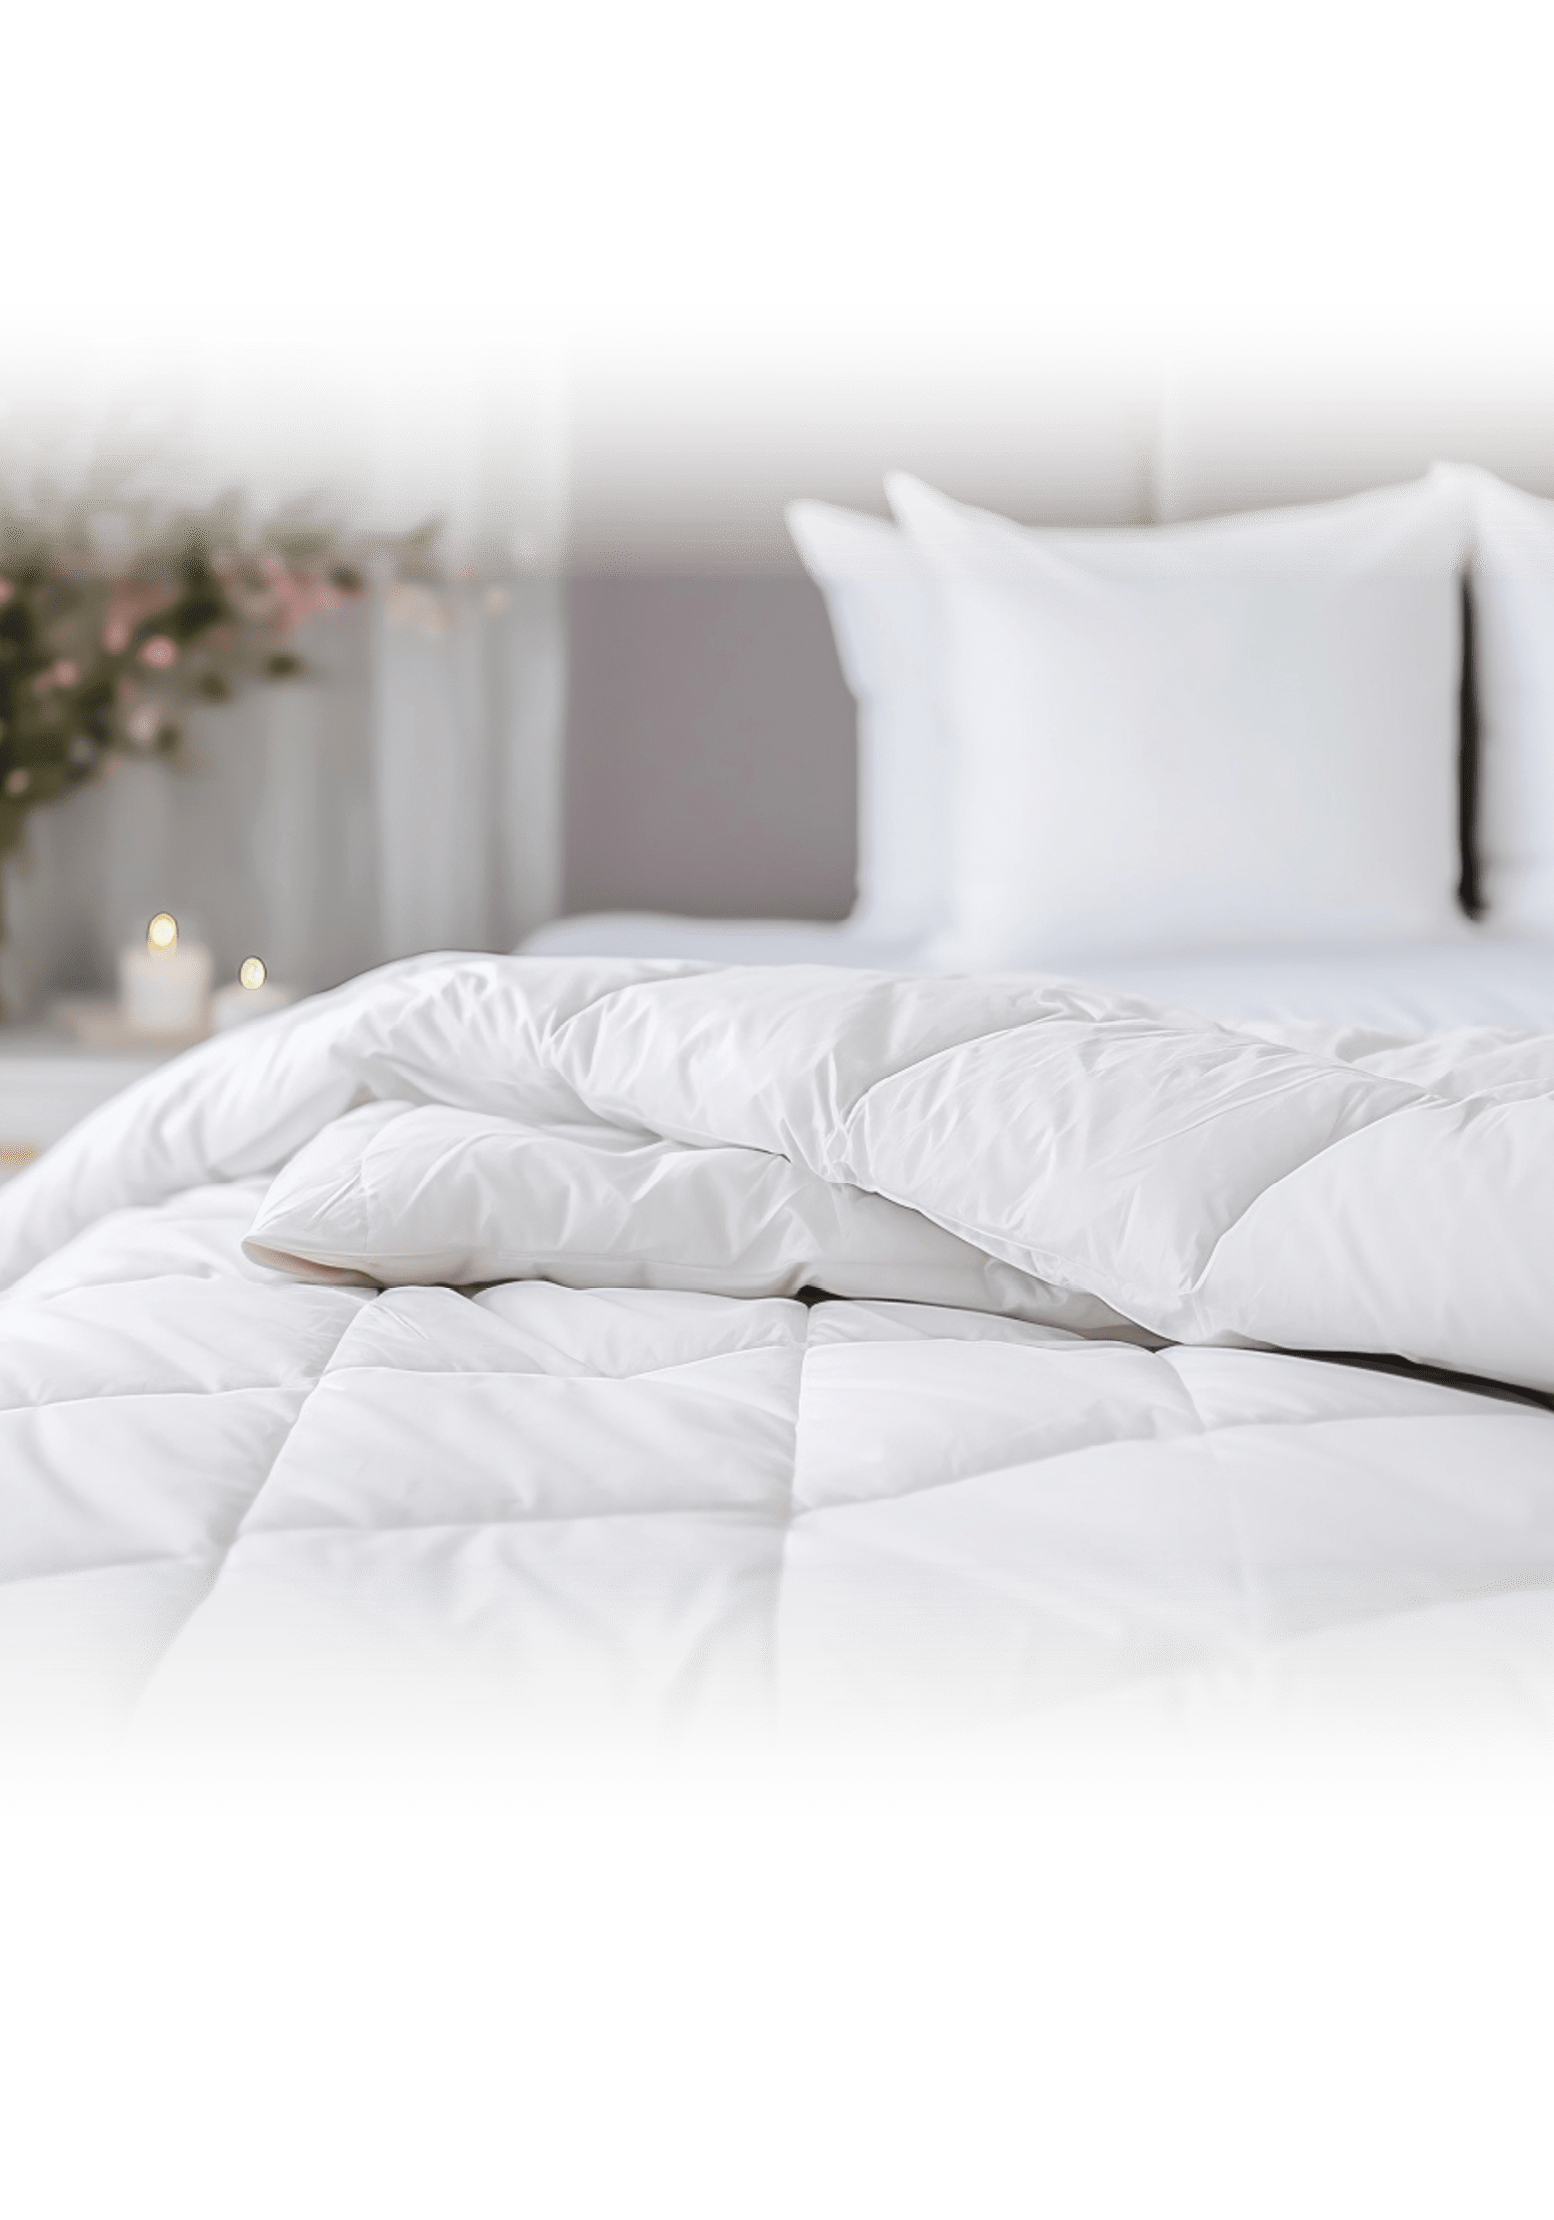 white soft duvet lying against background headboard with pillows,bedside table with flowers,candles,close-up,concept preparing for winter season,household chores,comfort in house,hotel,home textiles